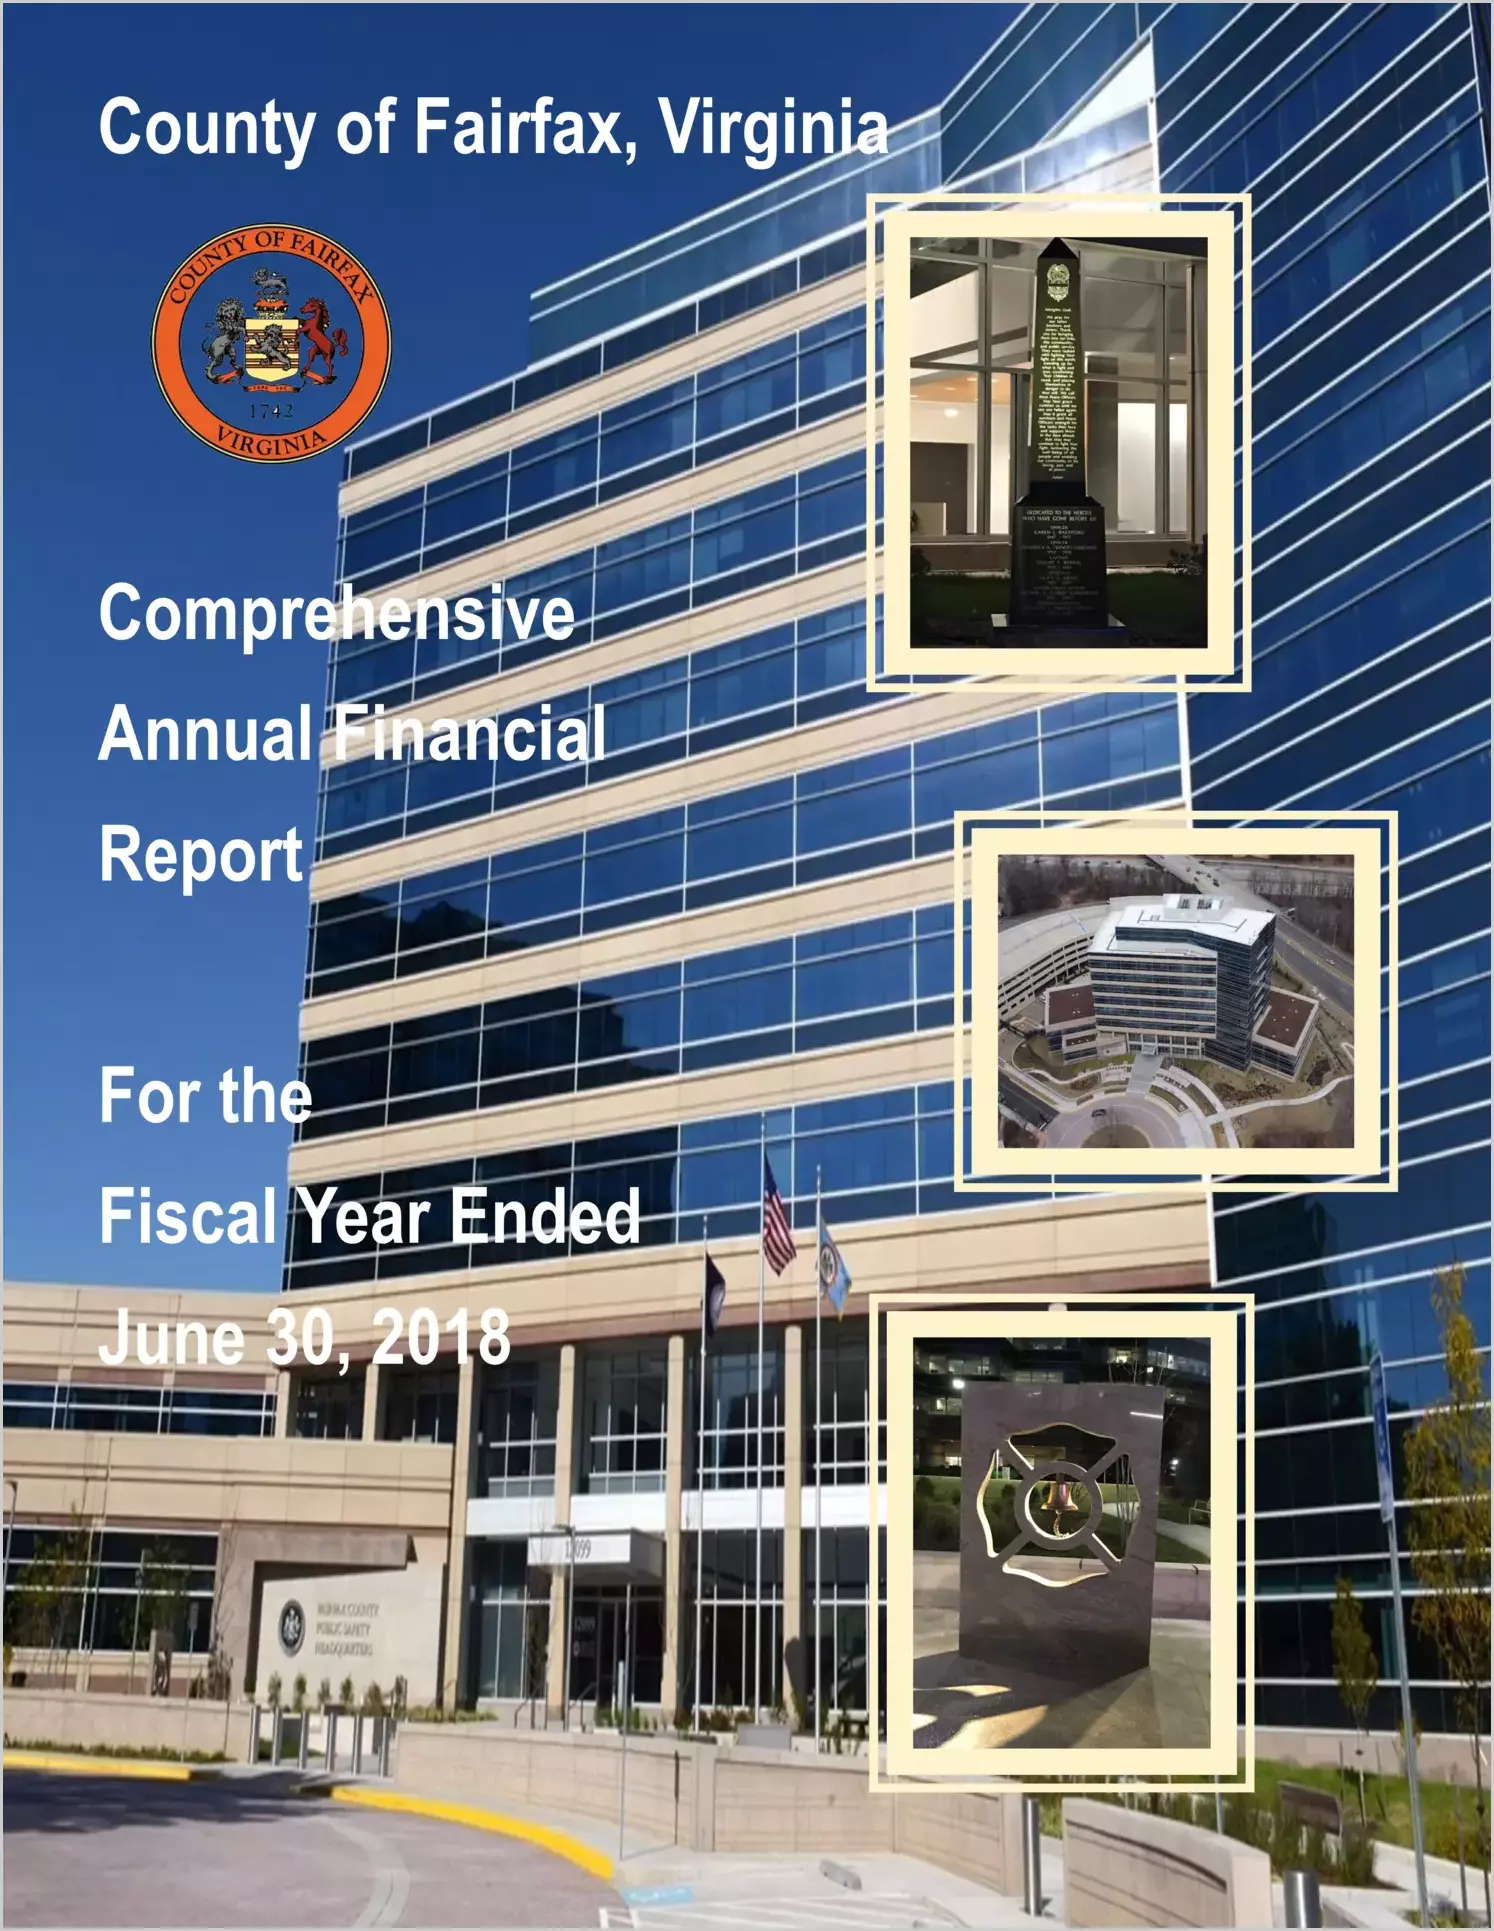 2018 Annual Financial Report for County of Fairfax